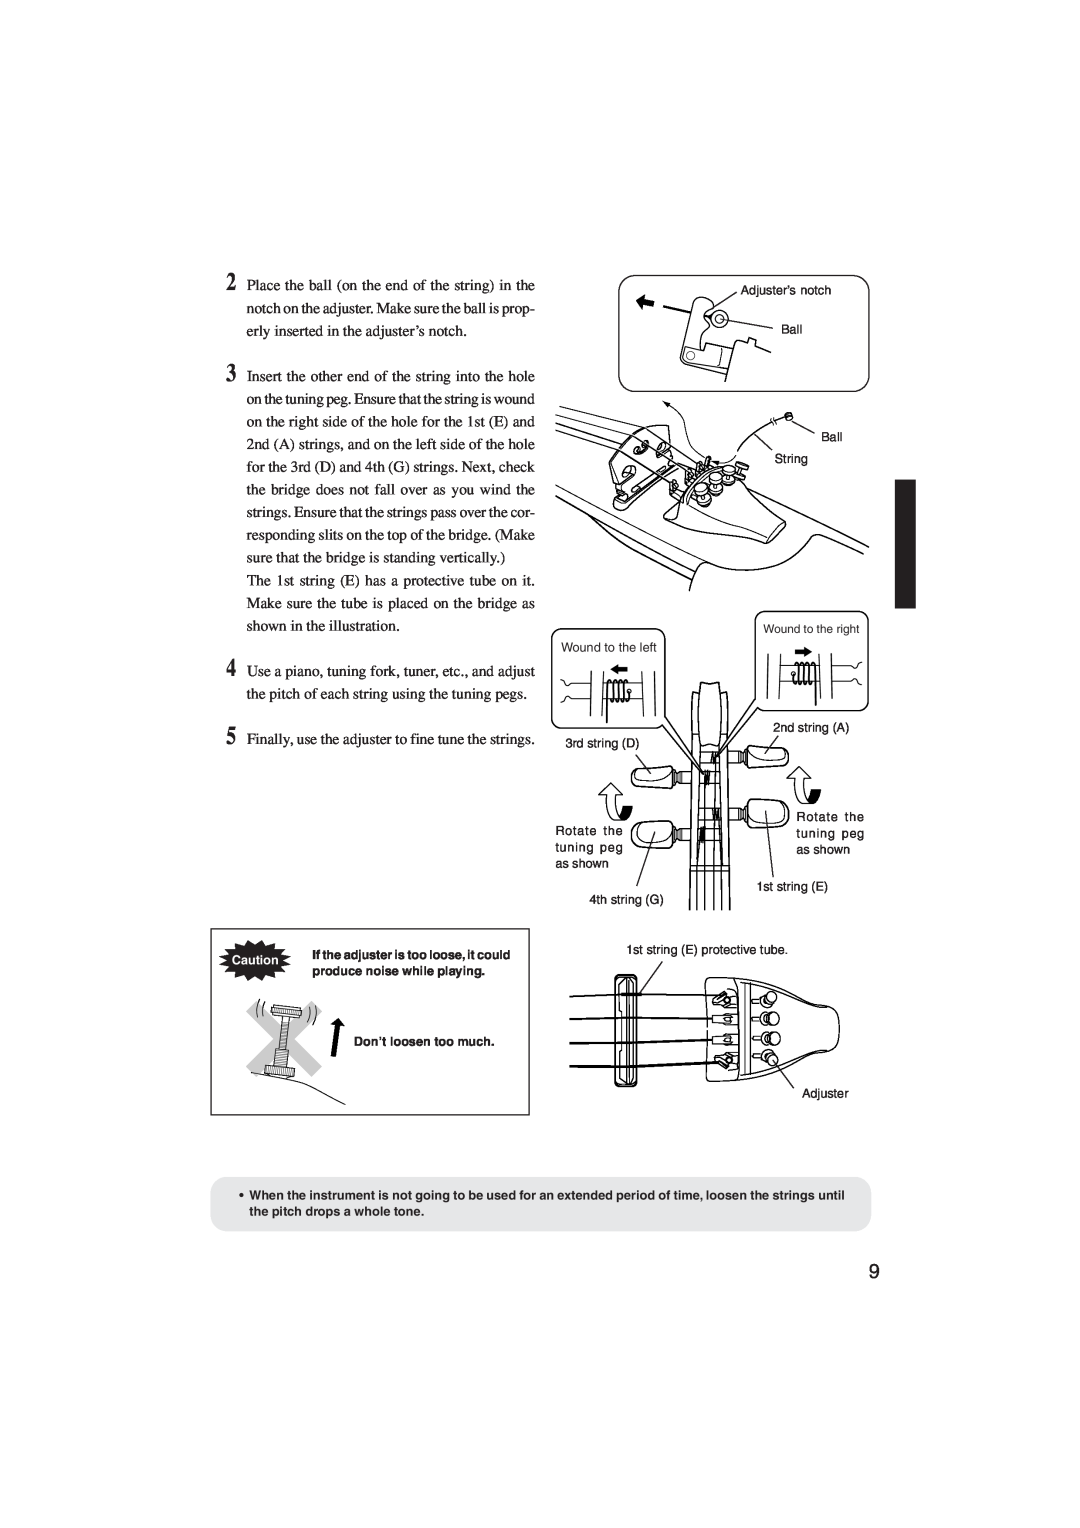 Yamaha SV120S, Sv 120 owner manual Finally, use the adjuster to fine tune the strings 